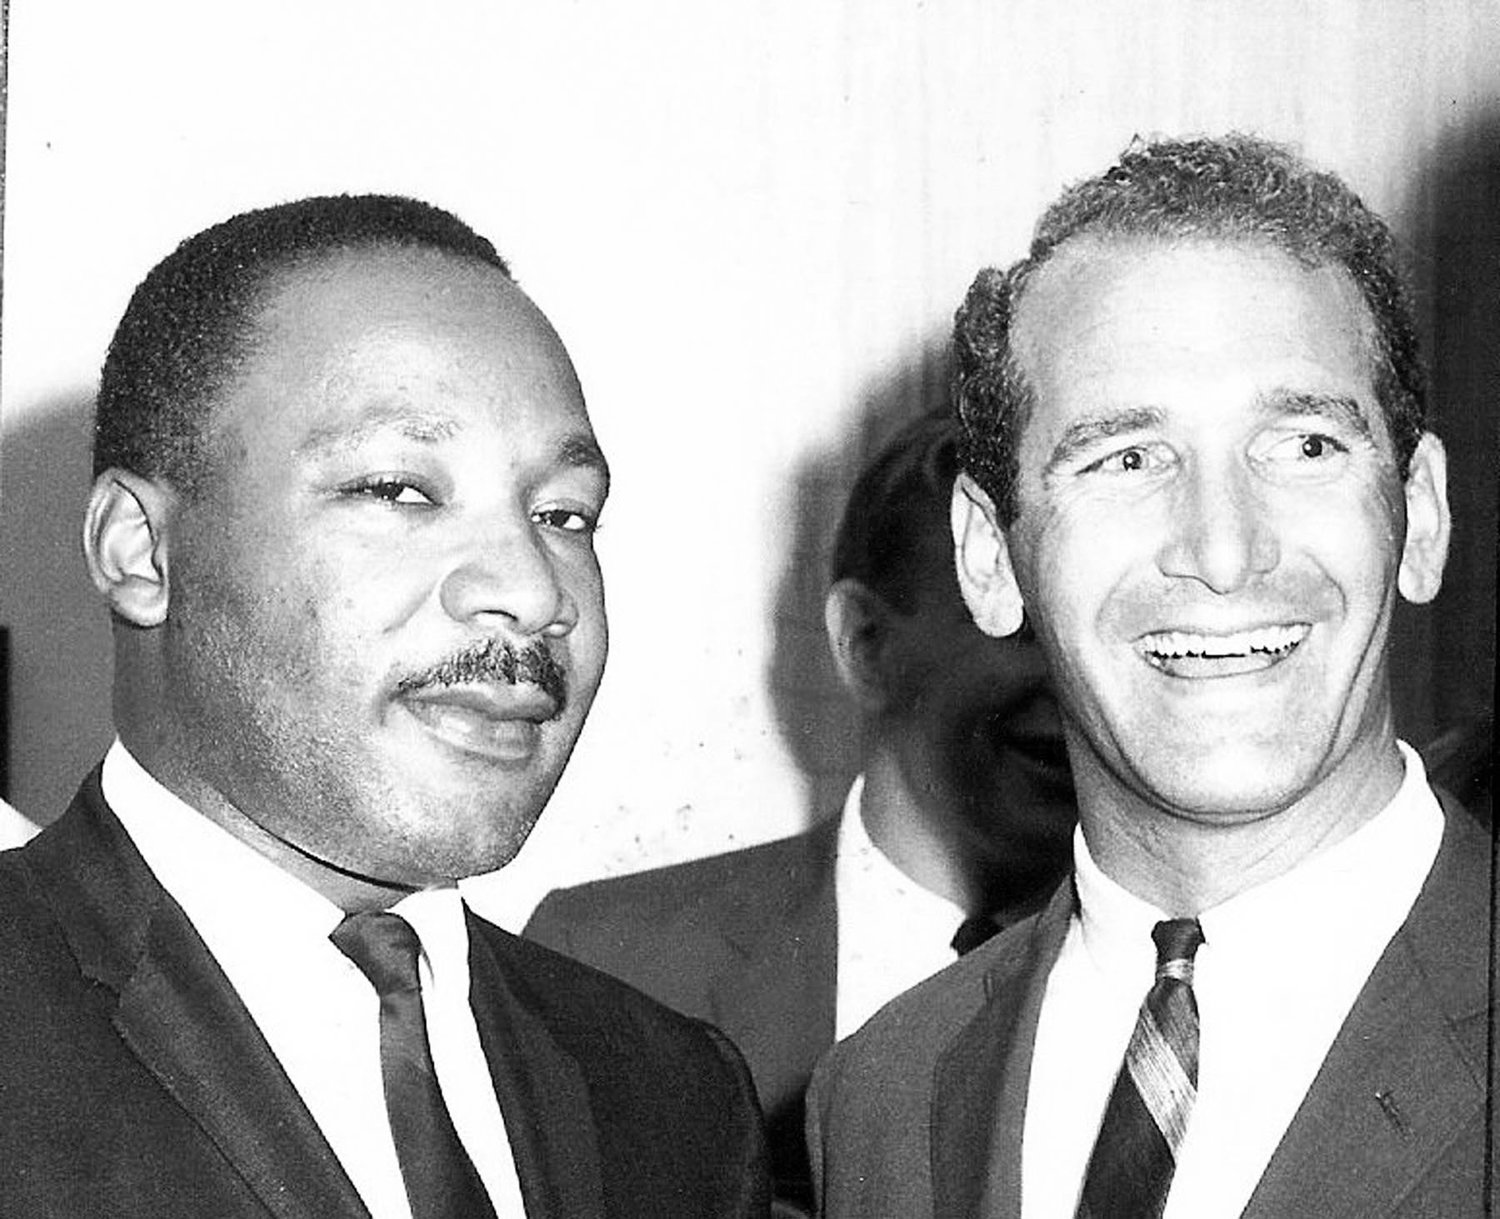 The Rev. Martin Luther King Jr., left, with Newtown Quaker Meeting member Norval Reece in 1967 in Philadelphia at a strategic planning session for an anti-poverty campaign.